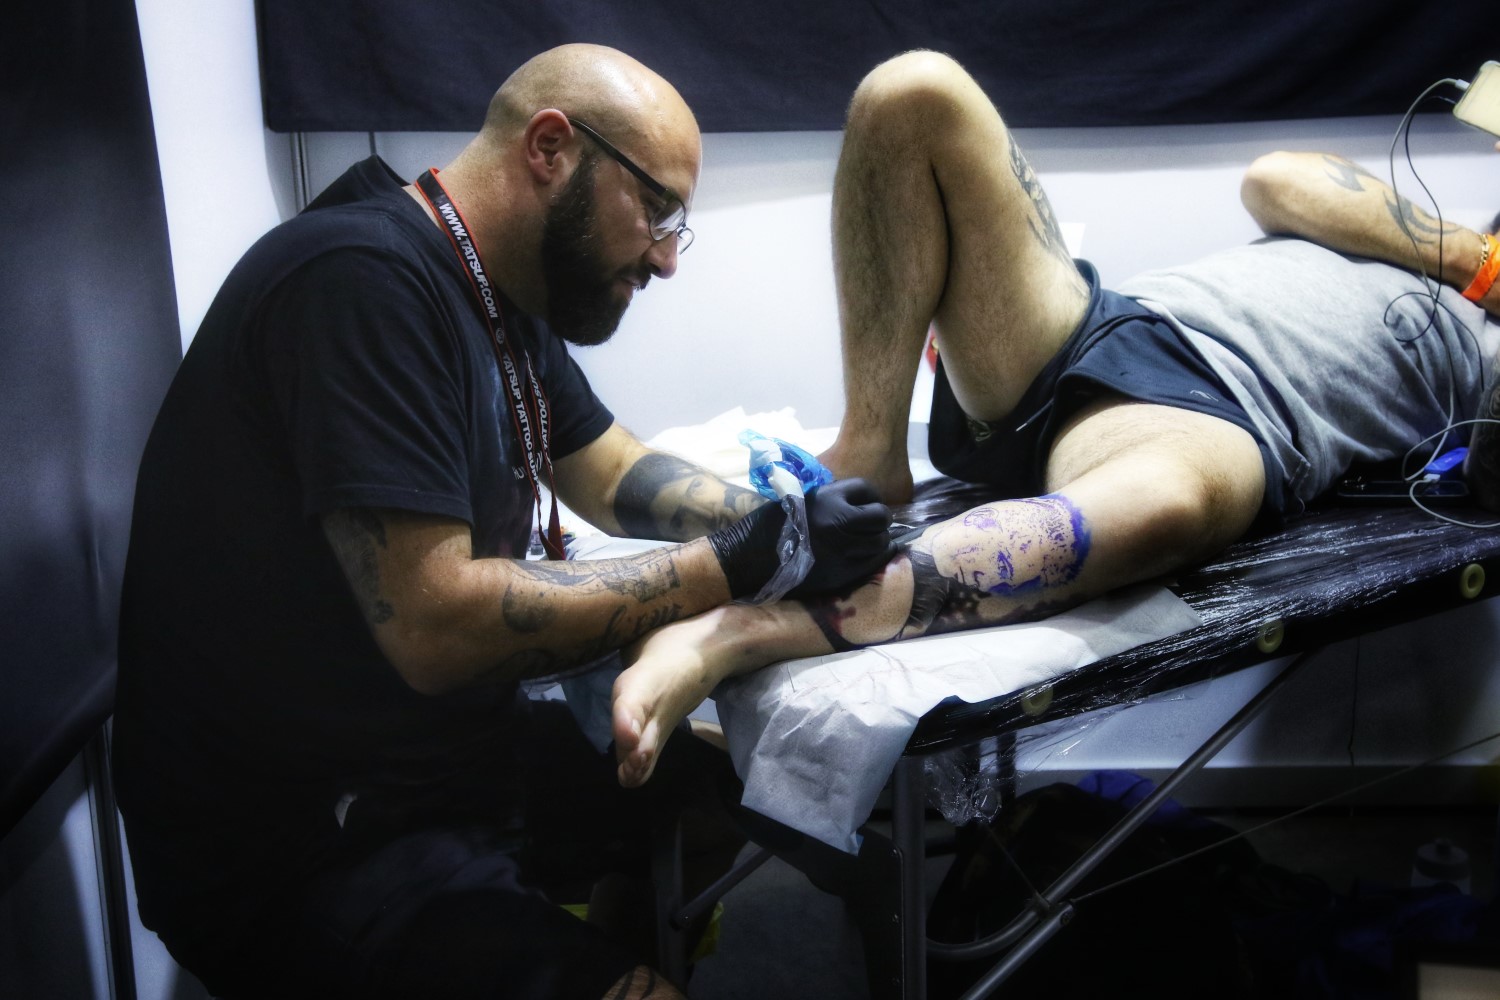 scenestr - 5 Tattoo Regrets With The Team At The Australian Tattoo Expo